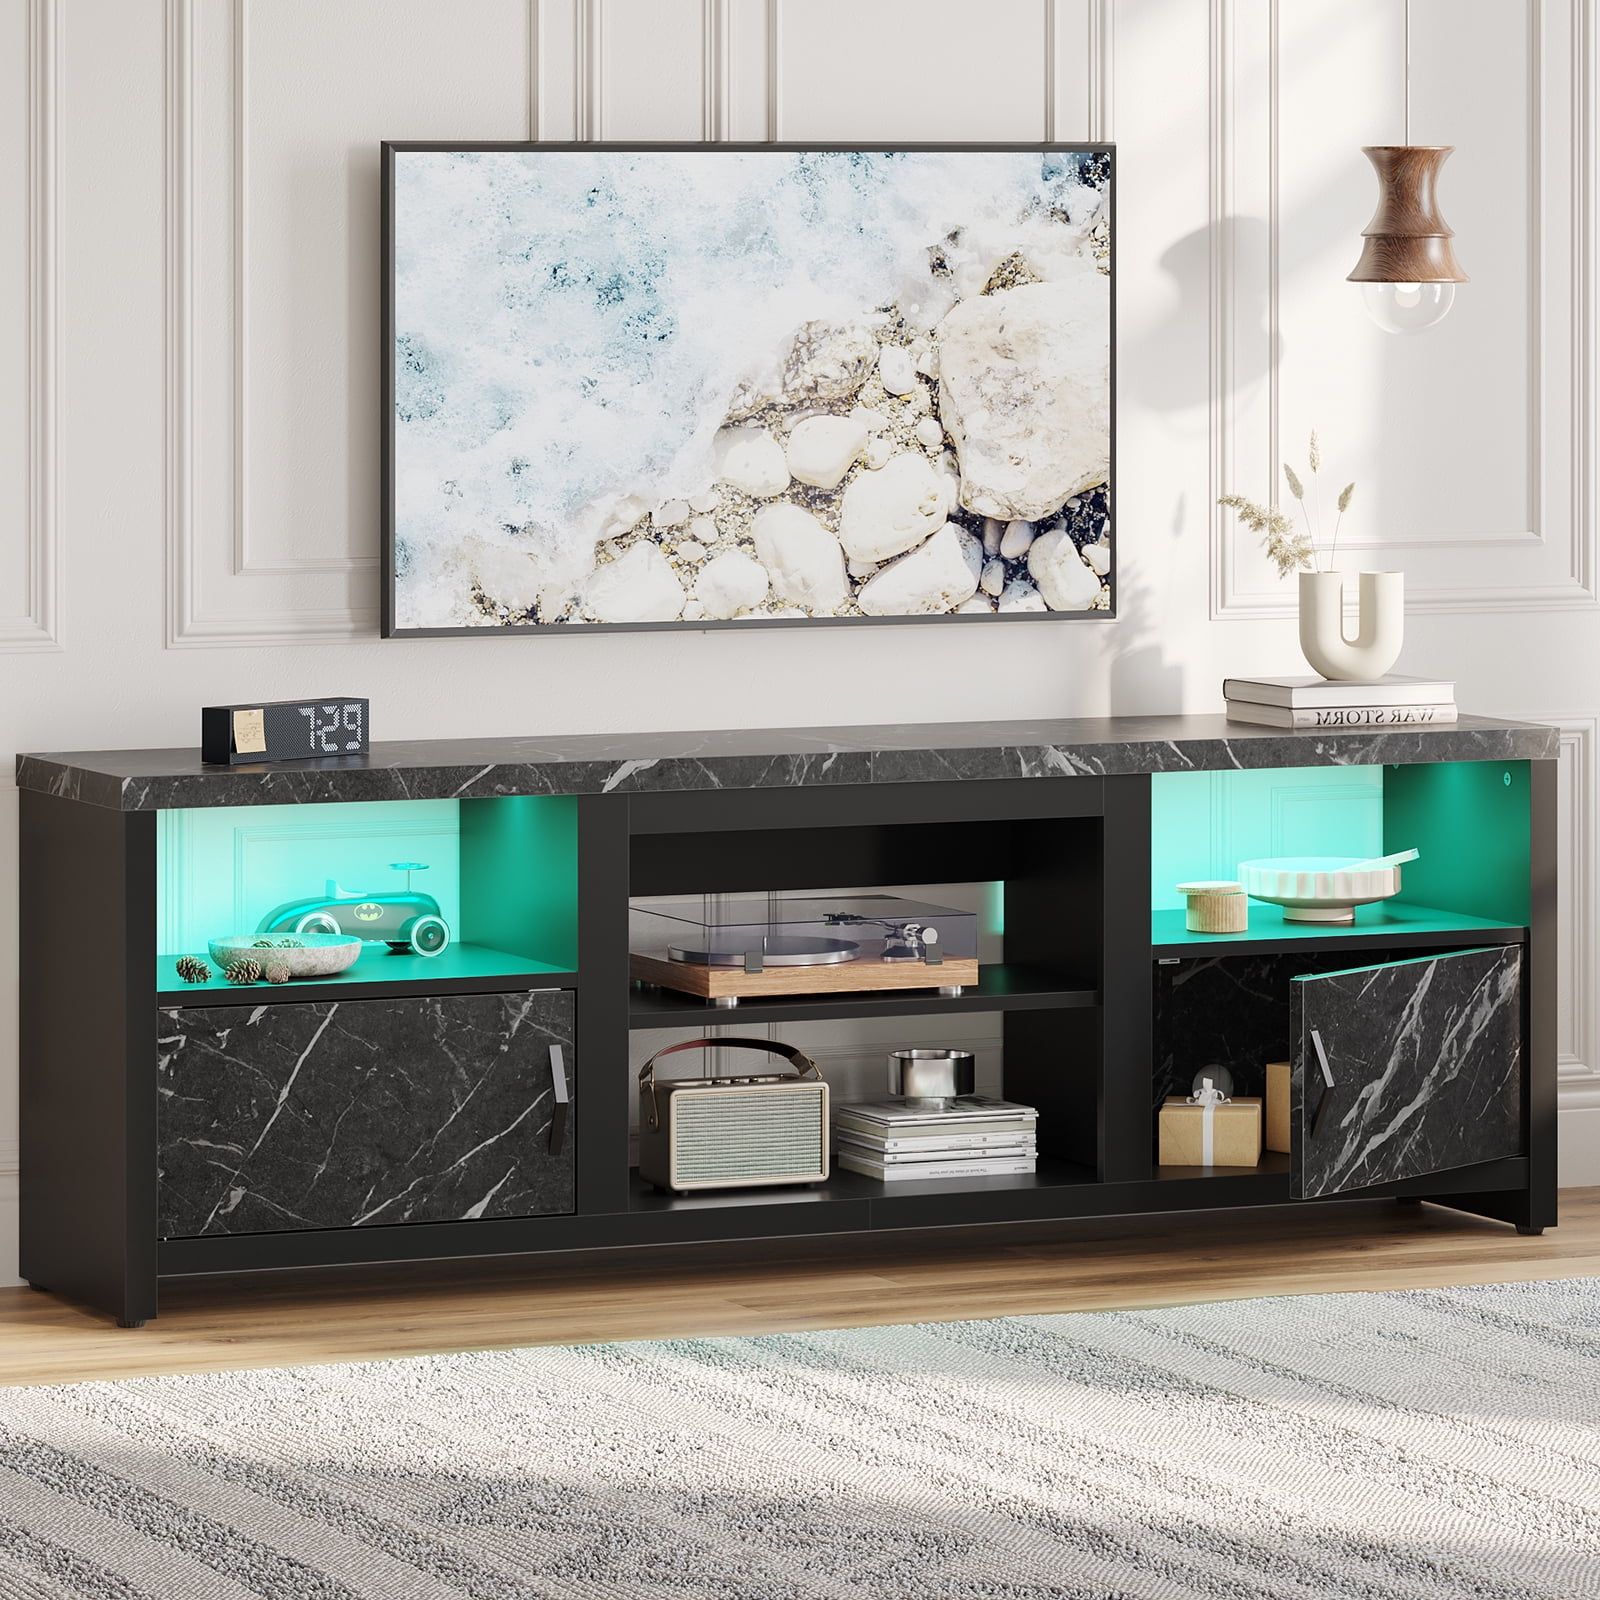 Bestier Modern Tv Stand For Tvs Up To 75" With Led Lights With Regard To Bestier Tv Stand For Tvs Up To 75" (Gallery 9 of 20)